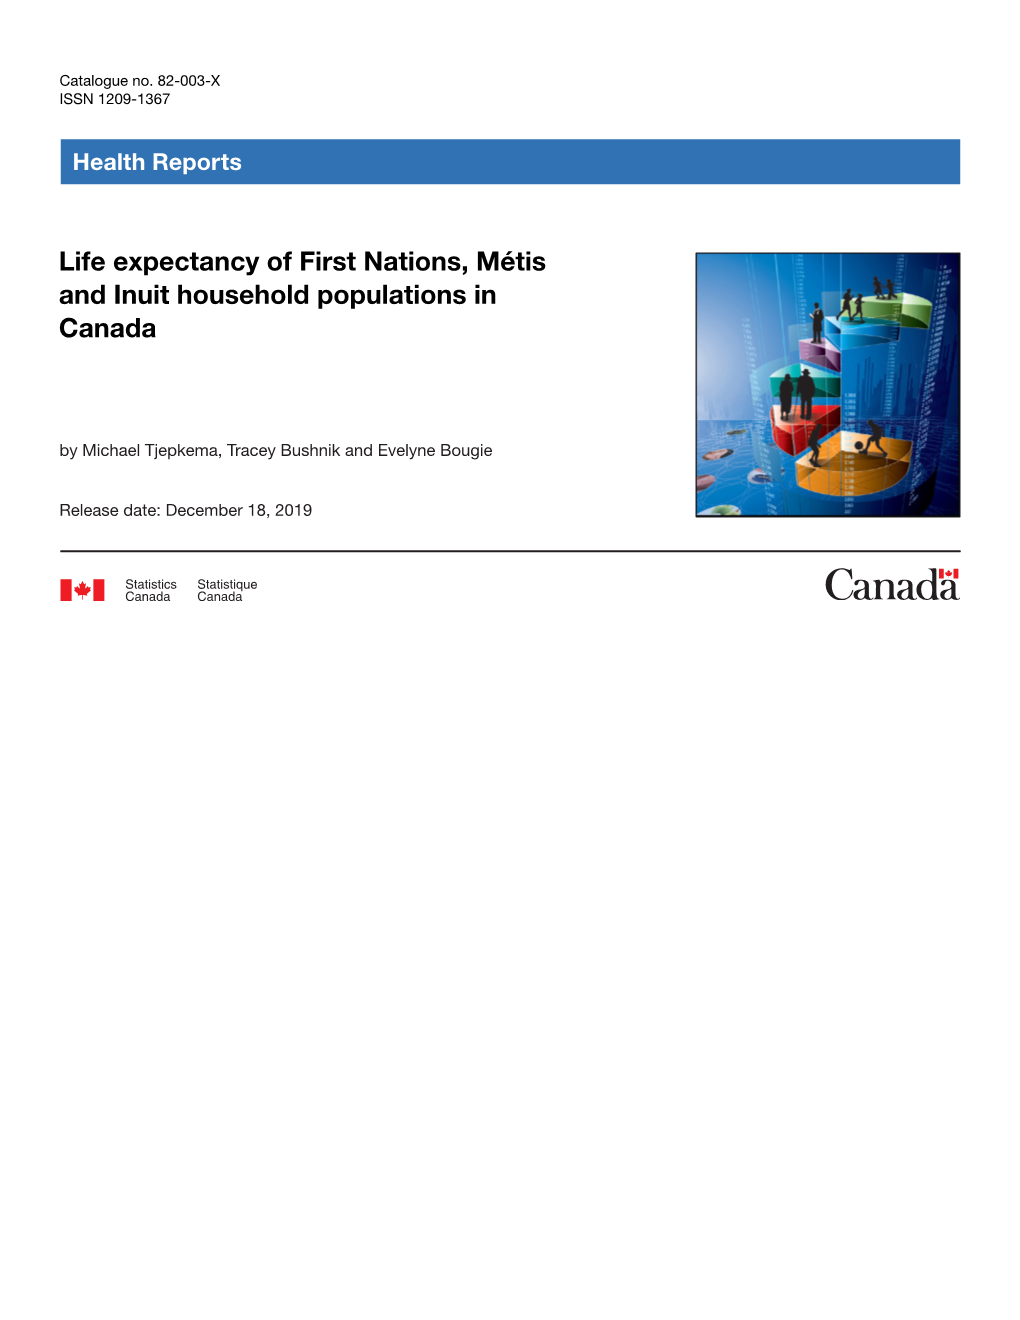 Life Expectancy of First Nations, Métis and Inuit Household Populations in Canada